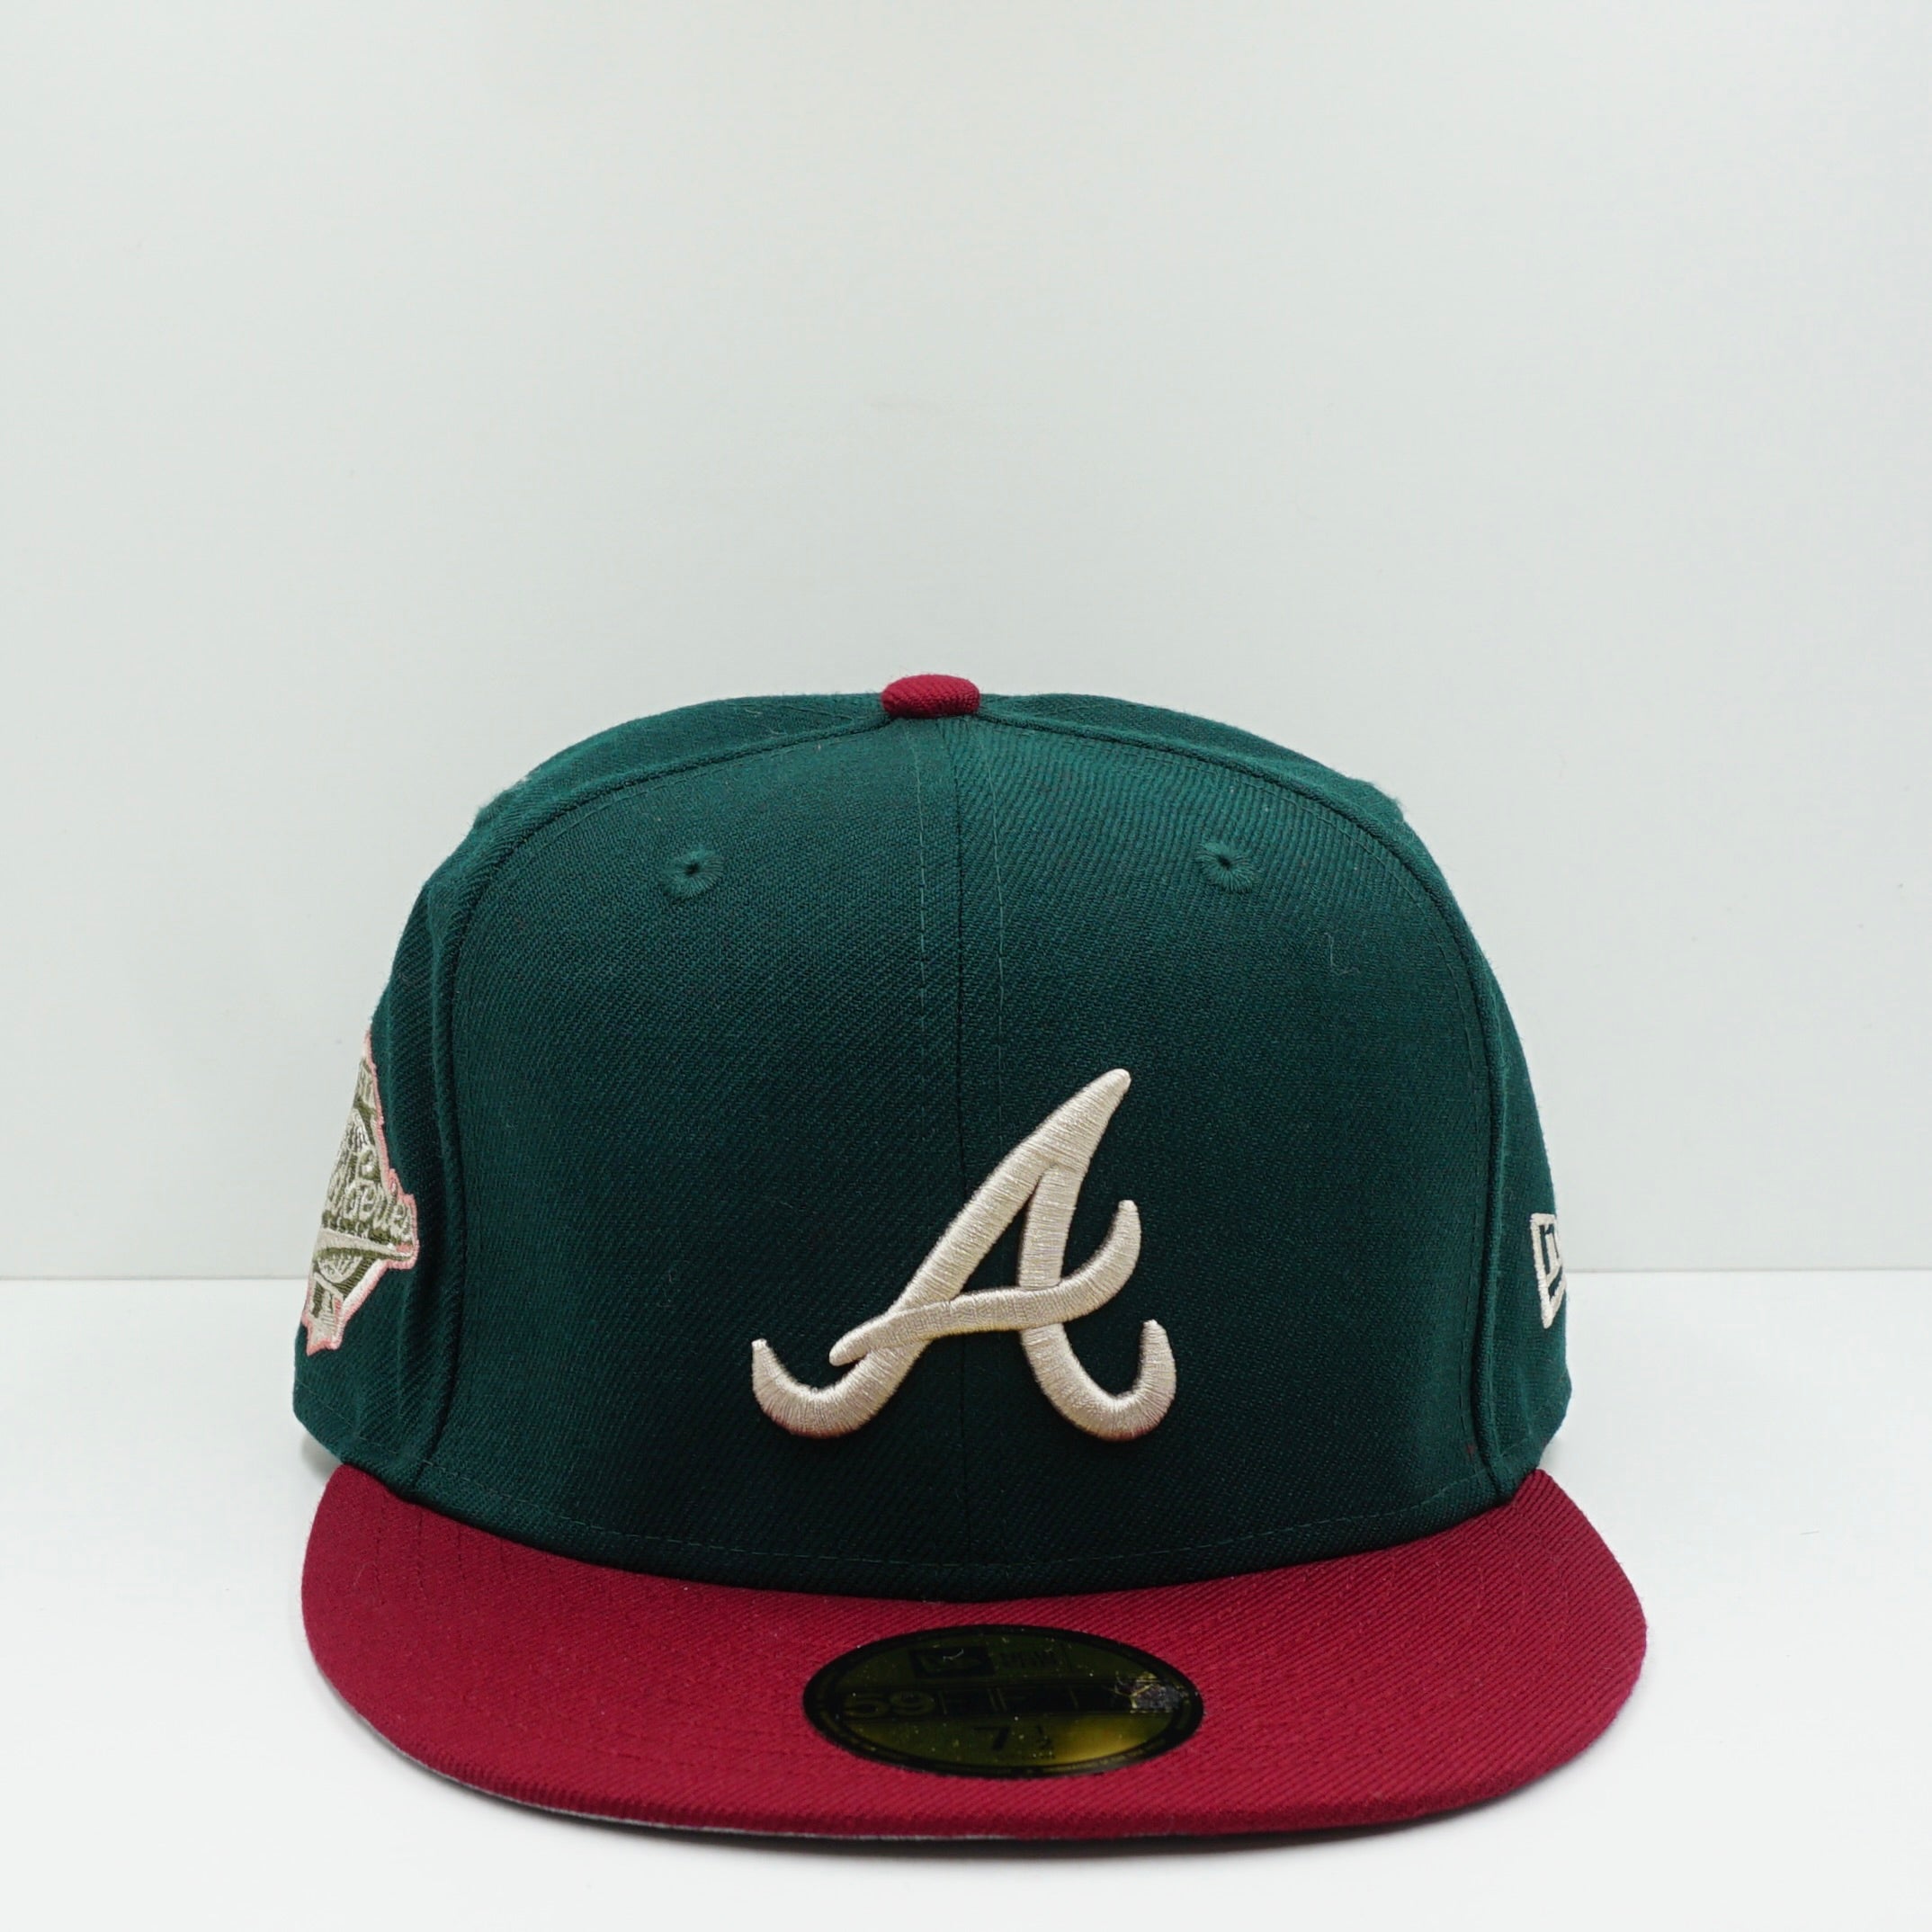 New Era Cooperstown Atlanta Braves Green/Red Fitted Cap